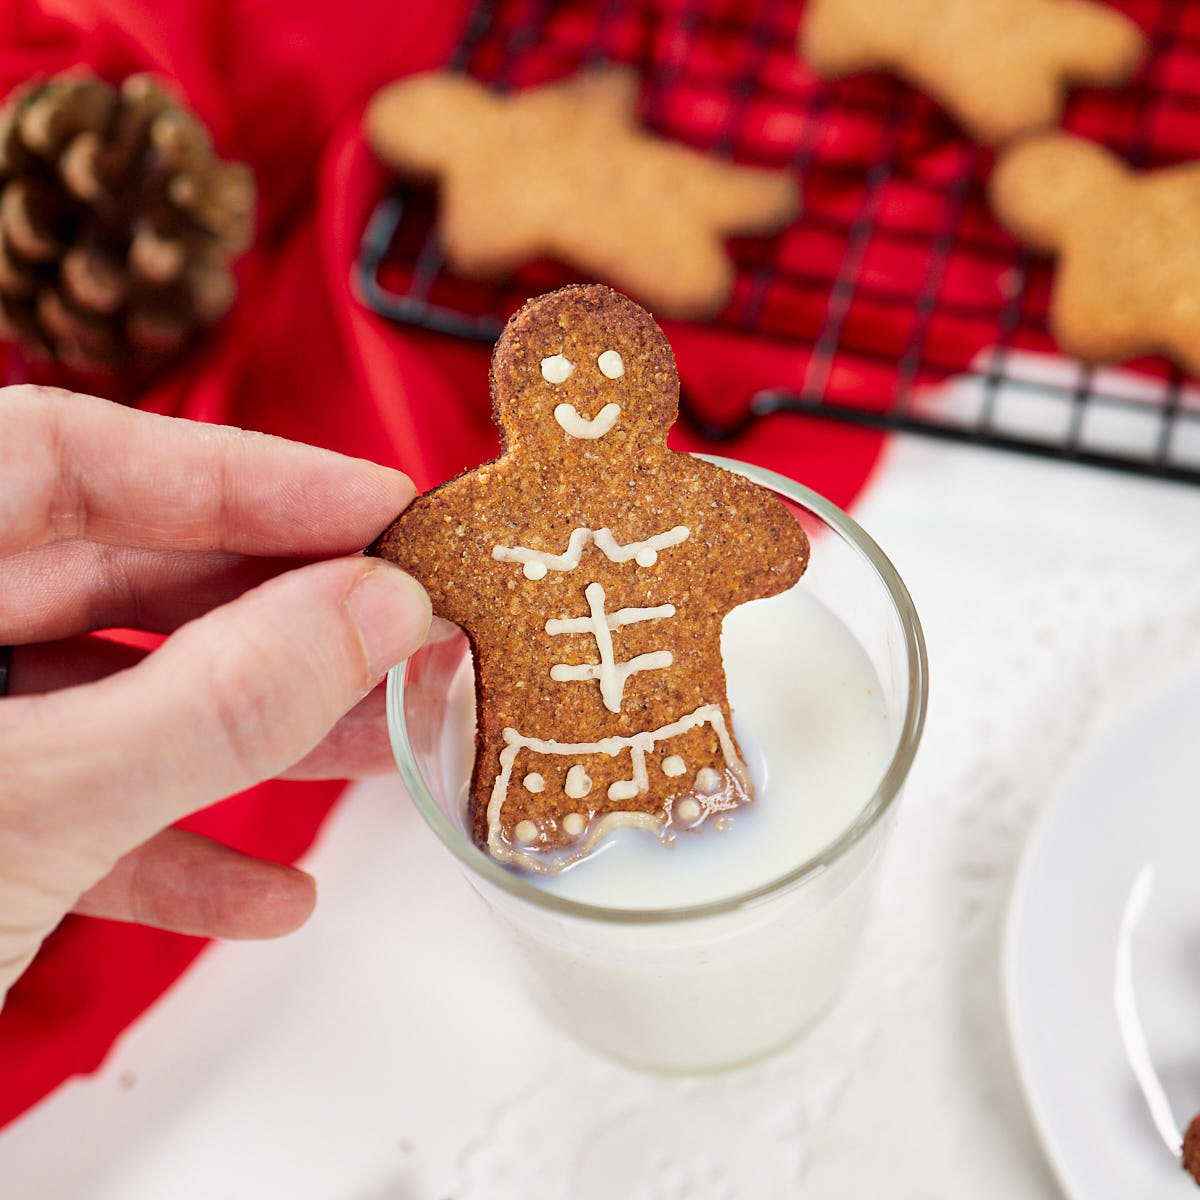 Gingerbread man chilling in a glass of milk.